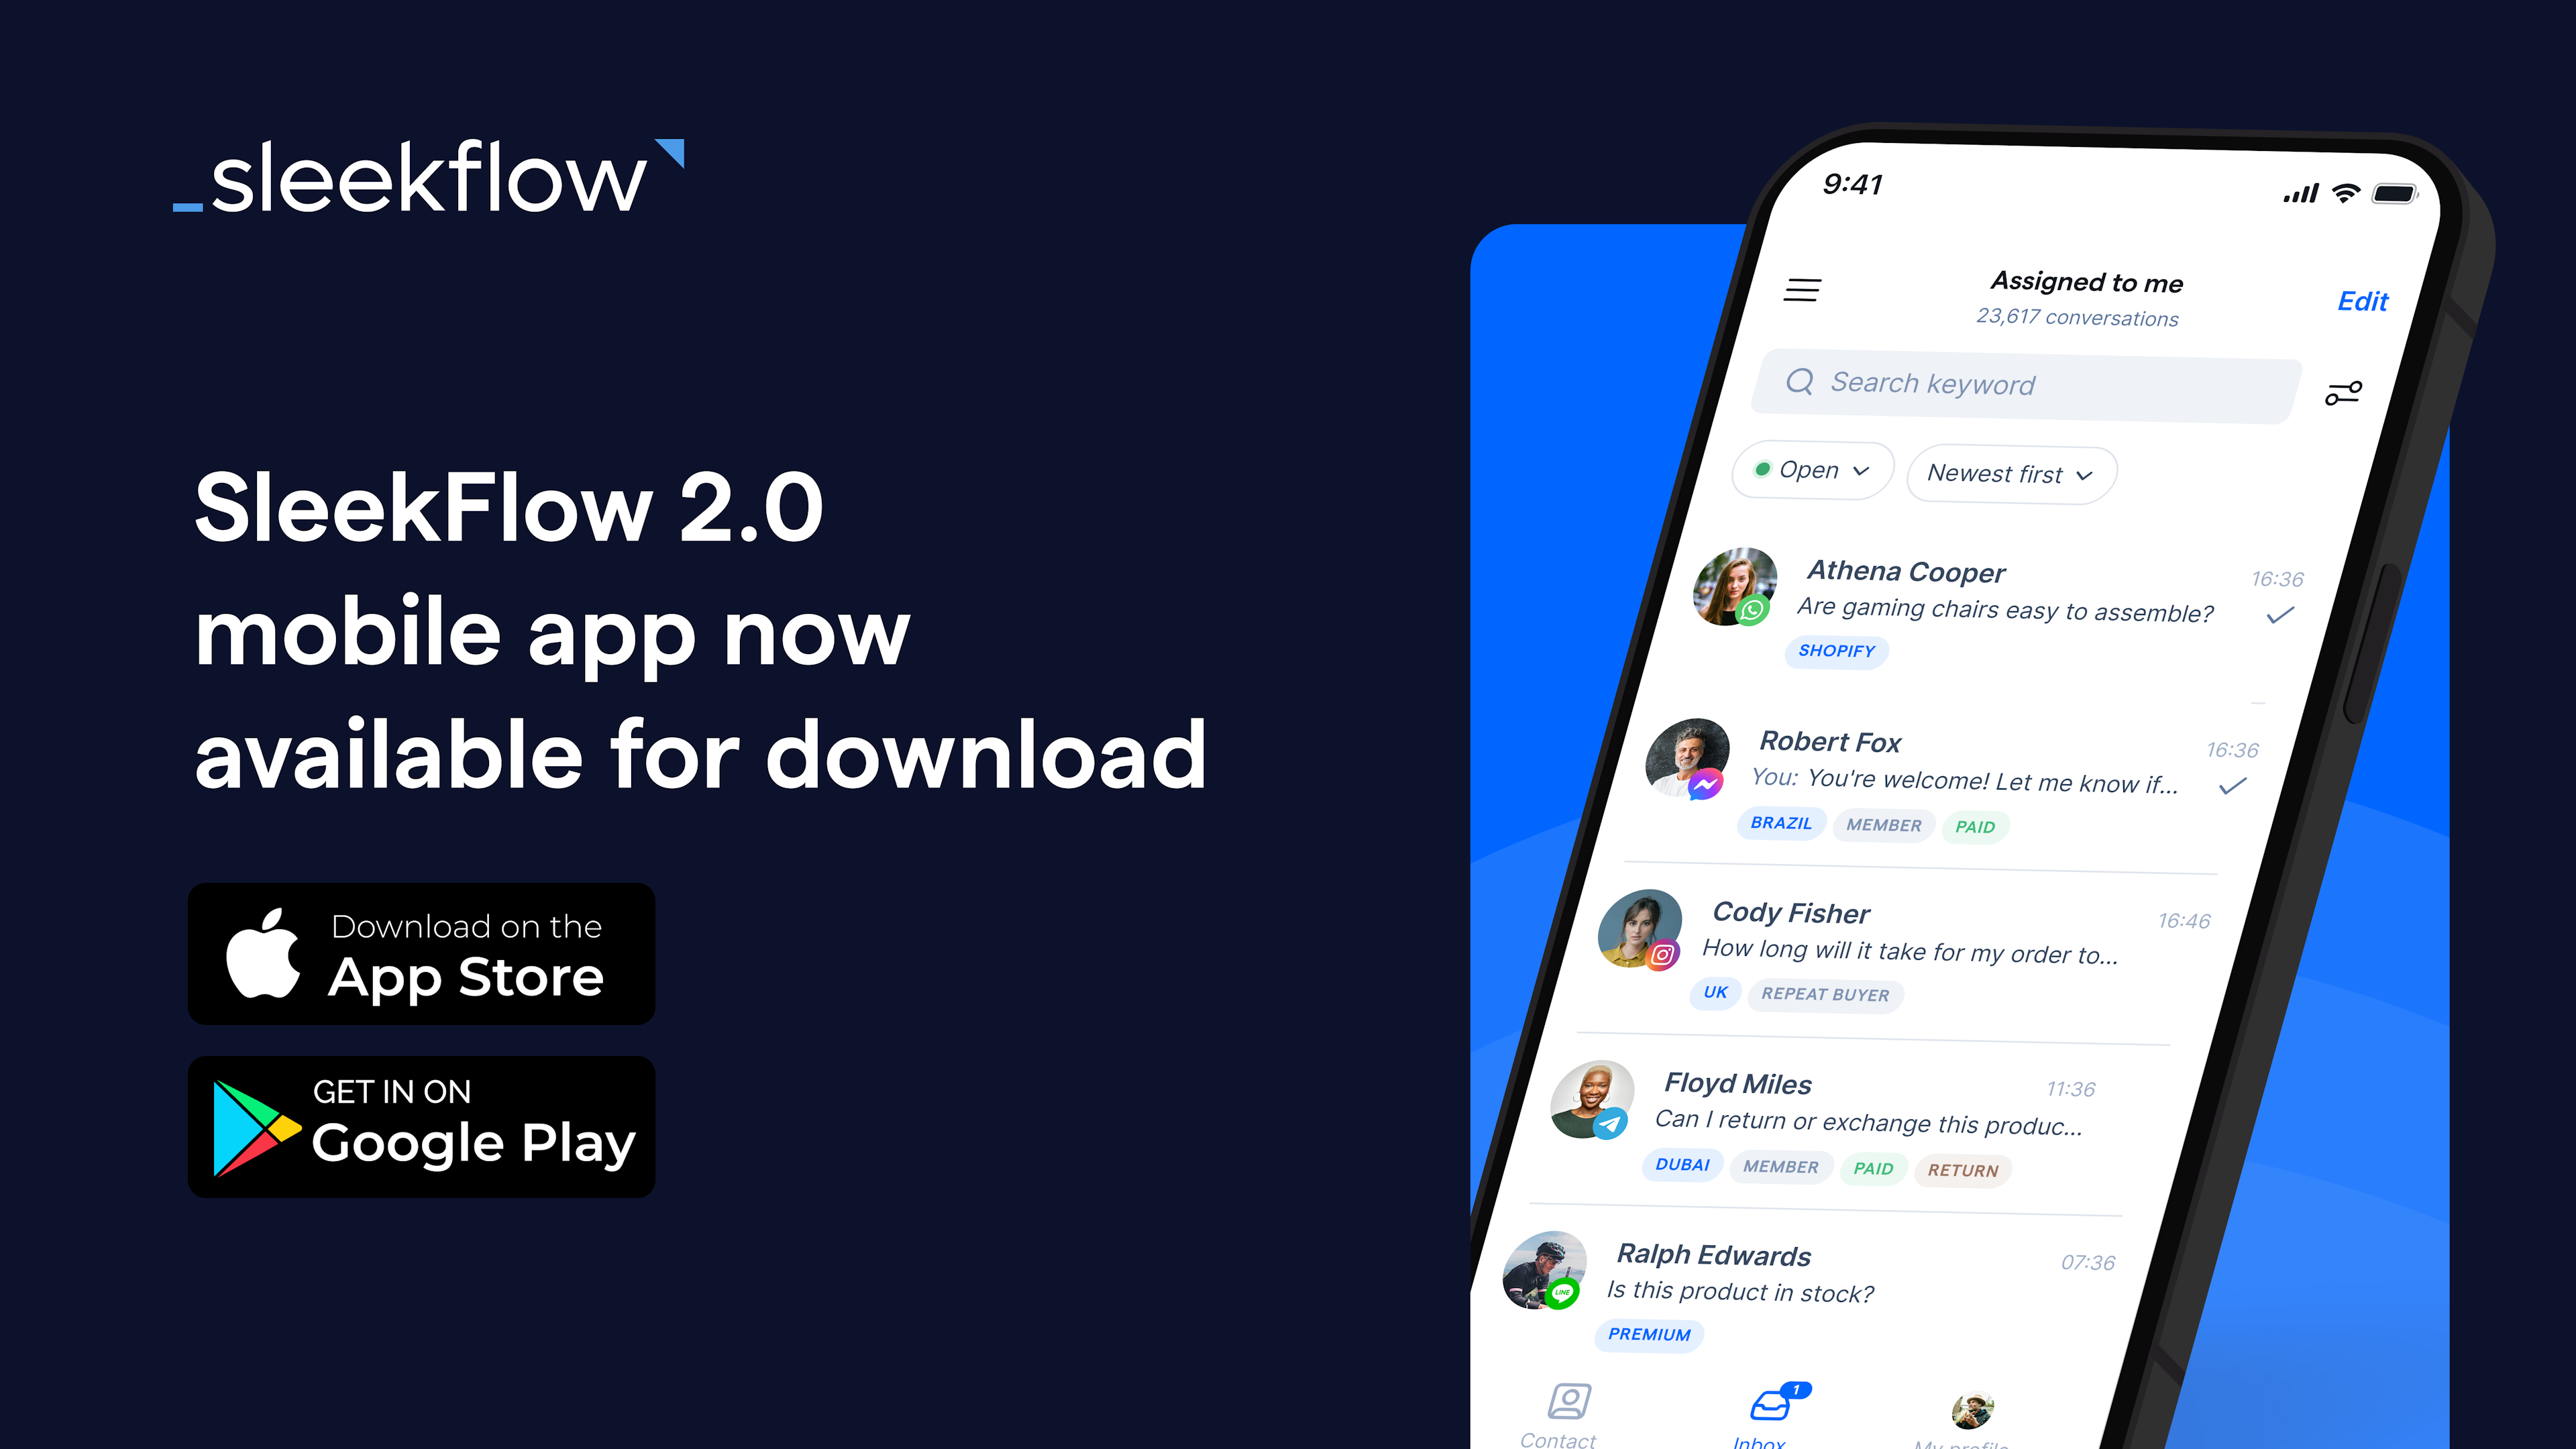 What's new in SleekFlow: mobile app 2.0